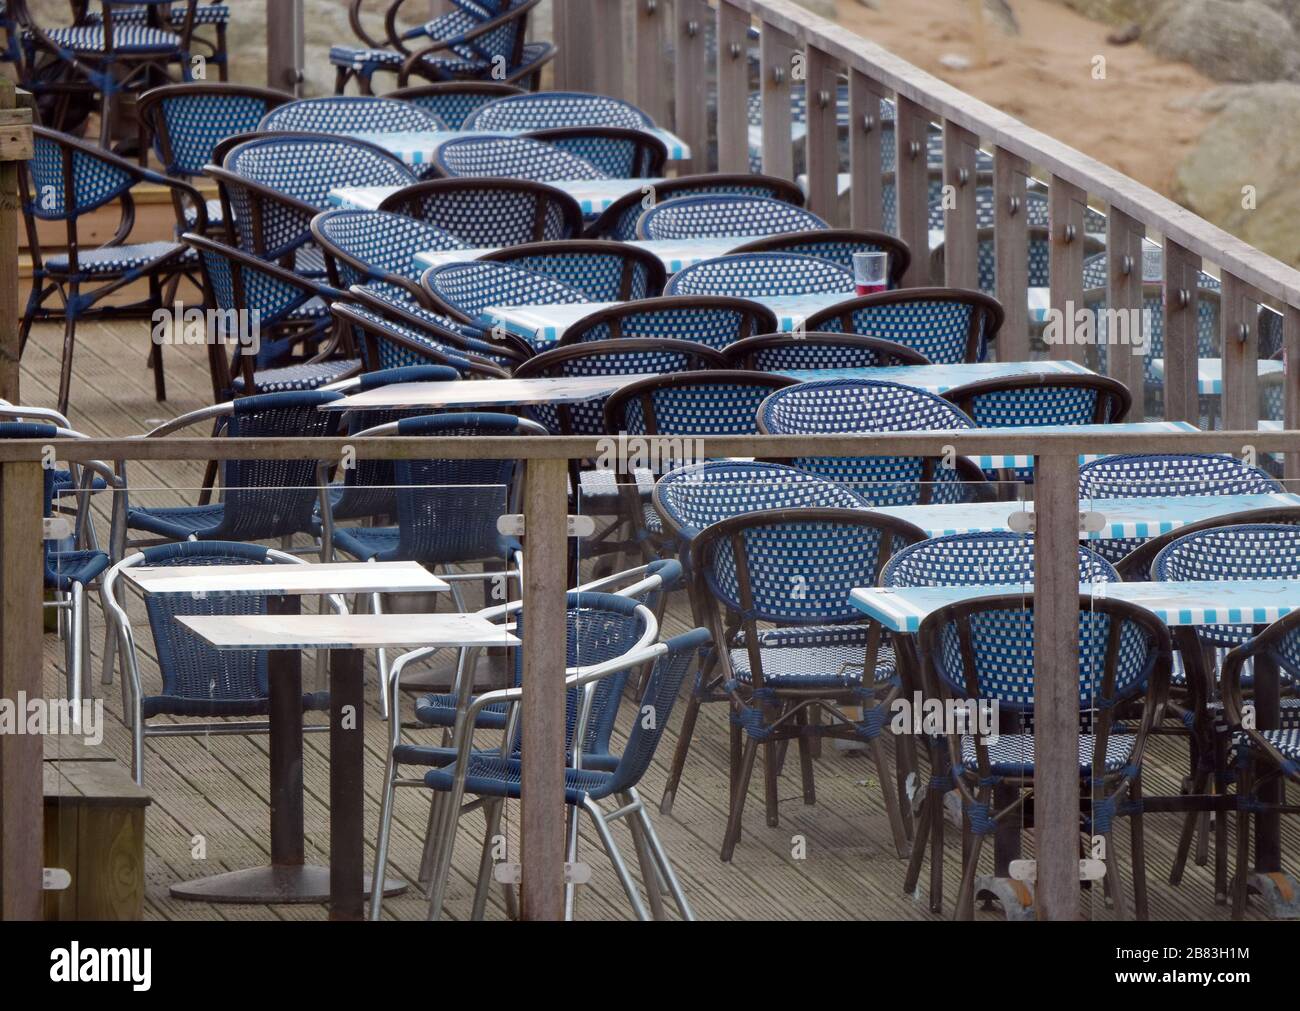 UK Weather, 19th March 2020. UK Fistral beach Newquay Cornwall. bars cafes and amusement arcades left deserted as public heed advice to stay away. Cre Stock Photo